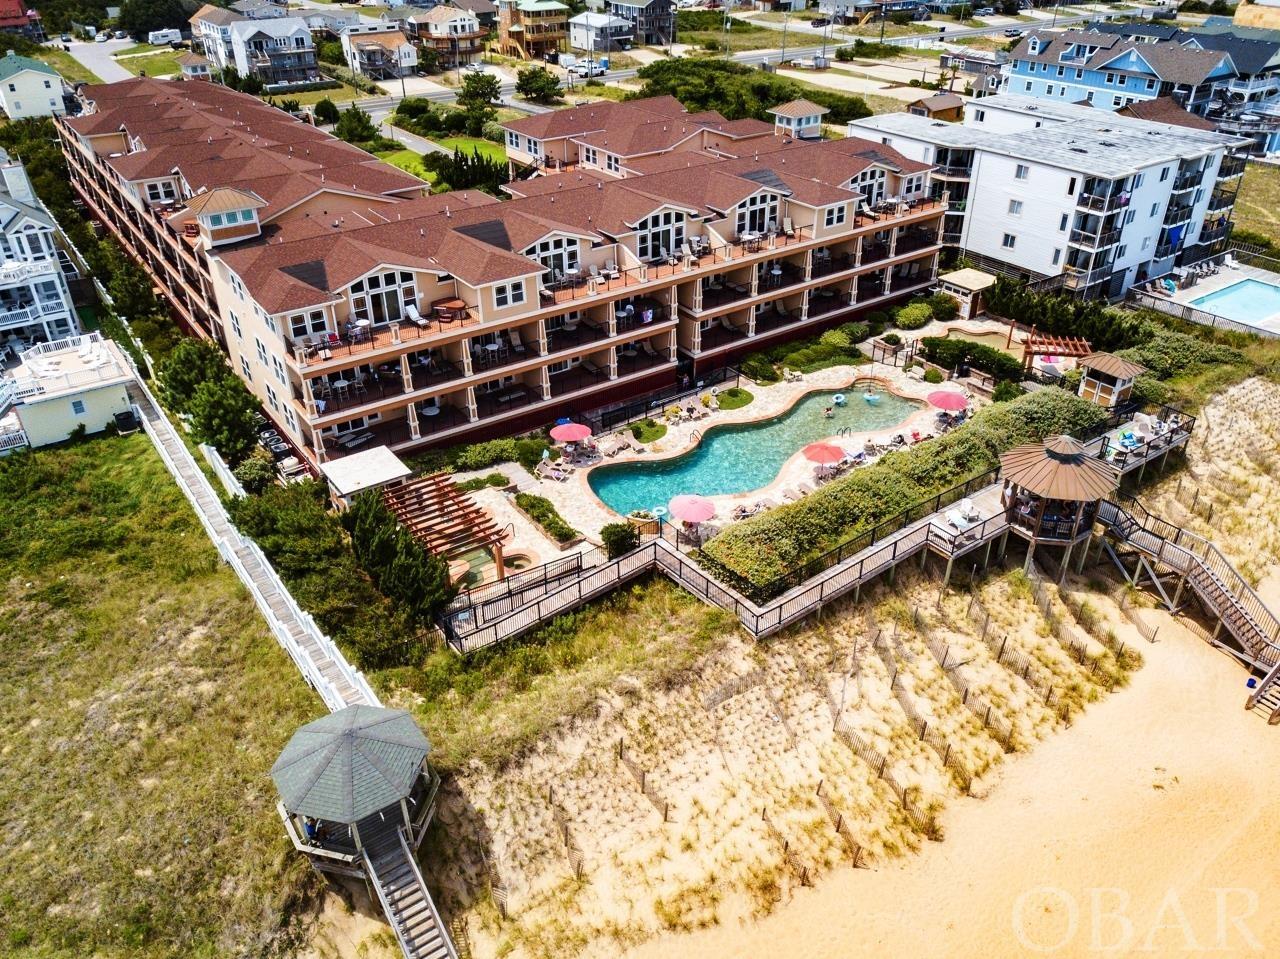 The Croatan Surf Club is a Prestigious Oceanfront Resort located on the Beautiful Beaches of the Outer Banks of North Carolina. This first class community boasts all the amenities one could desire for a fabulous beach vacation. This 3 bedroom/3 bath oceanfront condominium has upgraded appointments throughout including hardwood floors, custom ceramic tile, granite countertops throughout, electric fireplace and yes, the great ocean views from the covered decks overlooking the Atlantic Ocean. Exquisitely furnished for ones immediate enjoyment, either as a place to call home at the beach, for the discriminating vacationer or a great rental investment property. The amenities at the Croatan are as a First Class Resort should be with a tremendous 84' long custom oceanfront pool, separate children's pool w/spray ground, large outdoor hot tub/spa area  and dune-top boardwalks with gazebo which all lead down to the sand and waters of the Atlantic Ocean. Also, indoor amenities include an heated pool with hot tub/spa and fitness room which are open year round. Centrally located and very convenient to many local shops, grocery stores and restaurants. Check out the Croatan Surf Club Today!!!